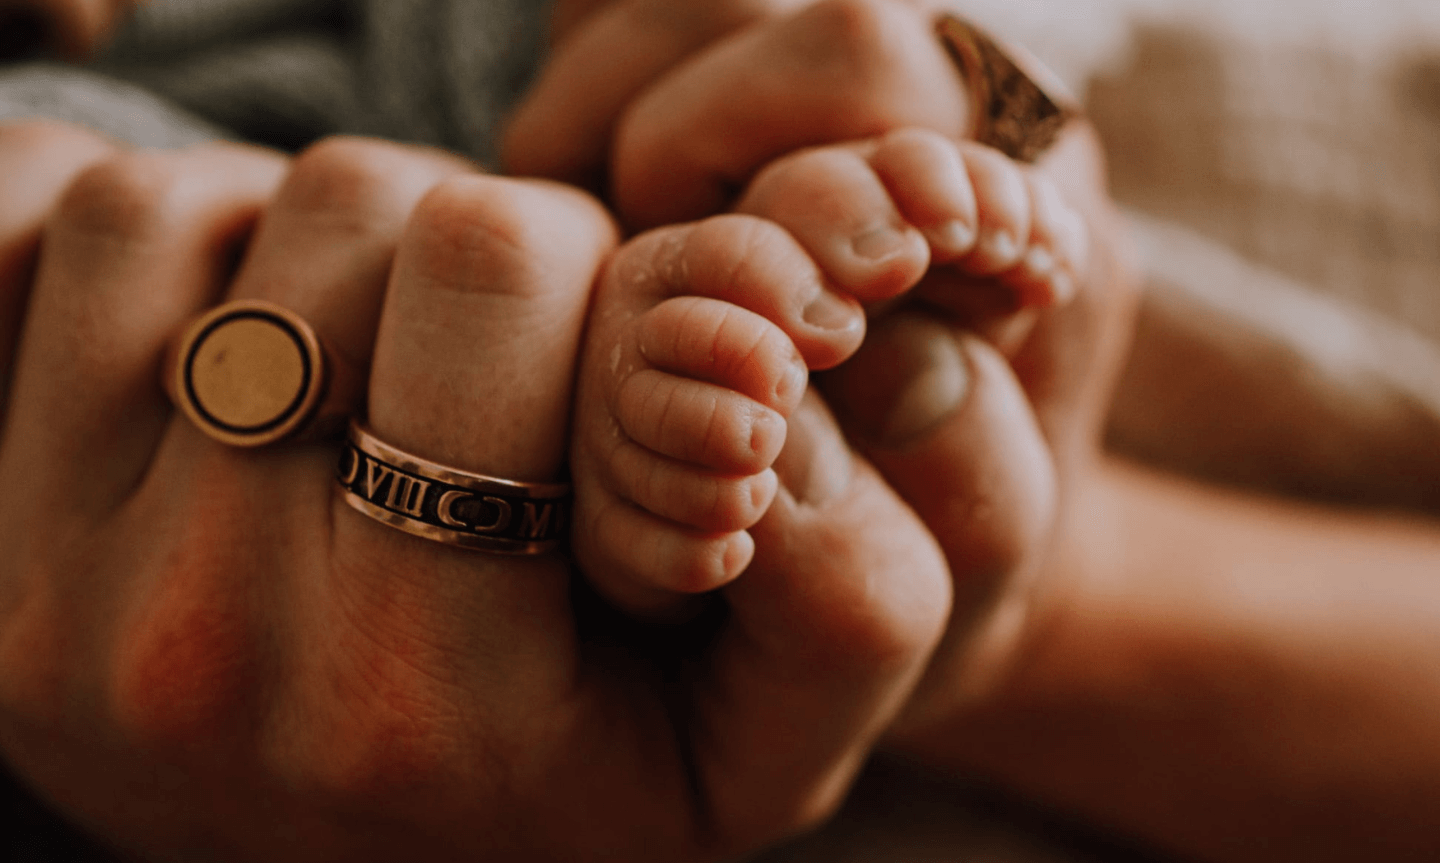 Fathers hands wrapped around a new born babies wearing meaningful rings as a gift for fathers day Day